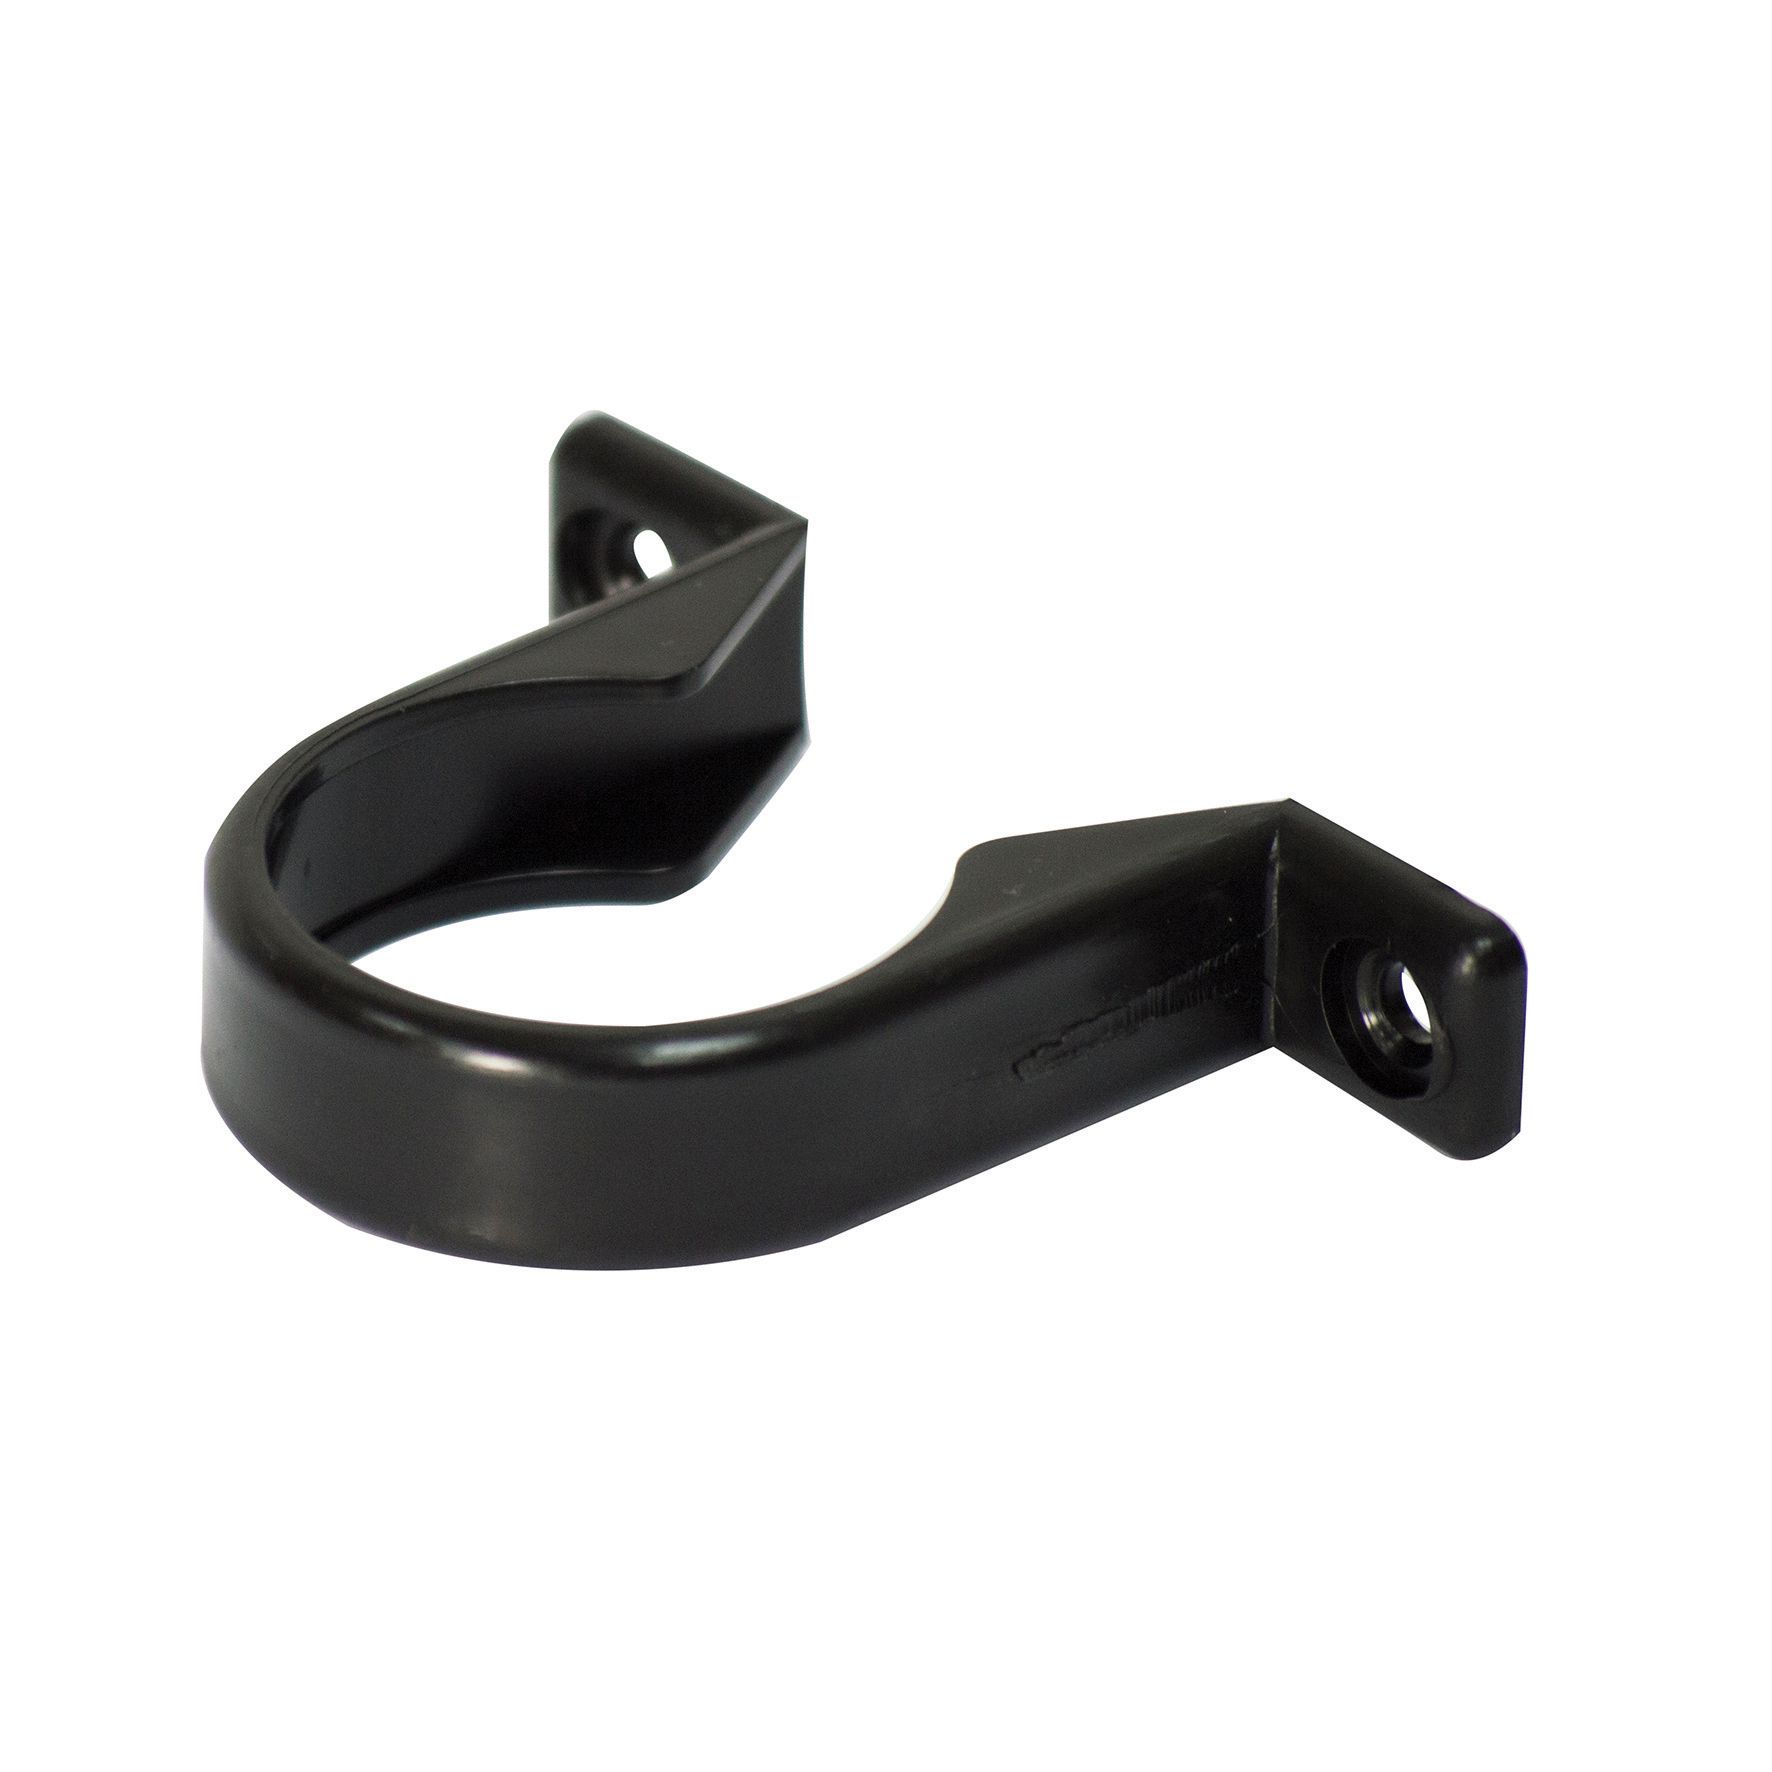 Image of FloPlast WP35B Push-fit Waste Pipe Clips - Black 40mm Pack of 3